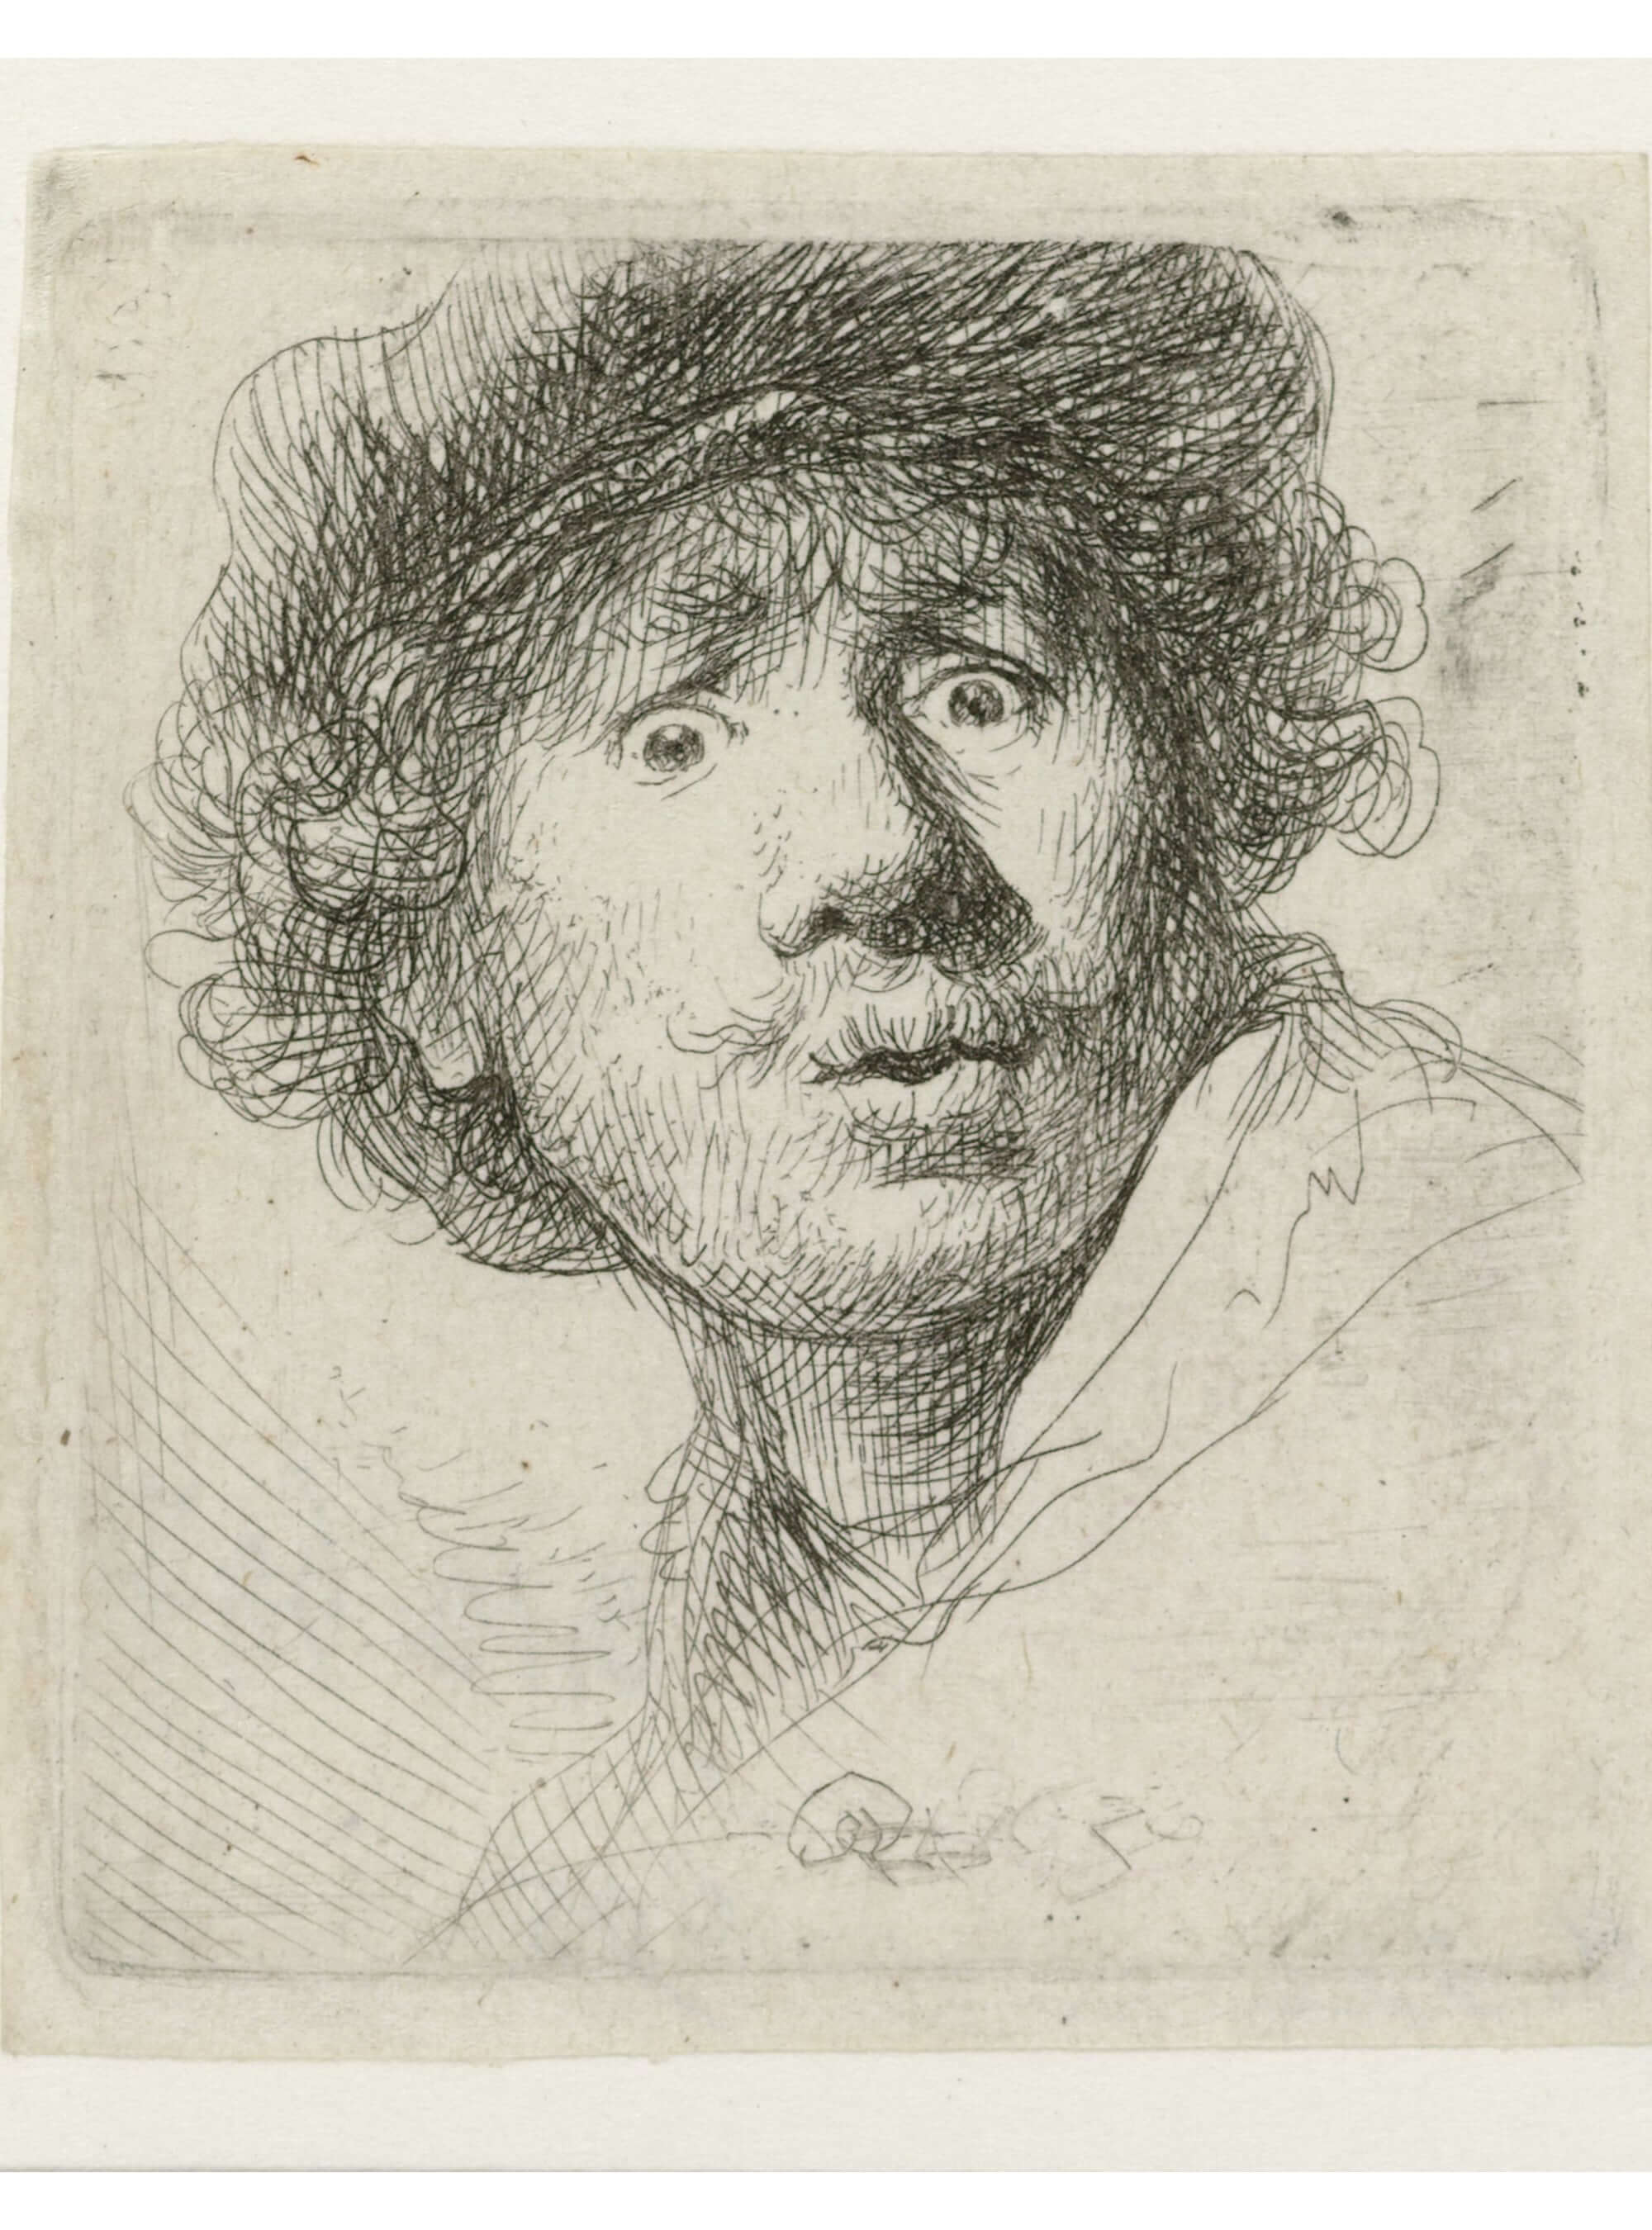 Self-Portrait in a Cap, Open-Mouthed